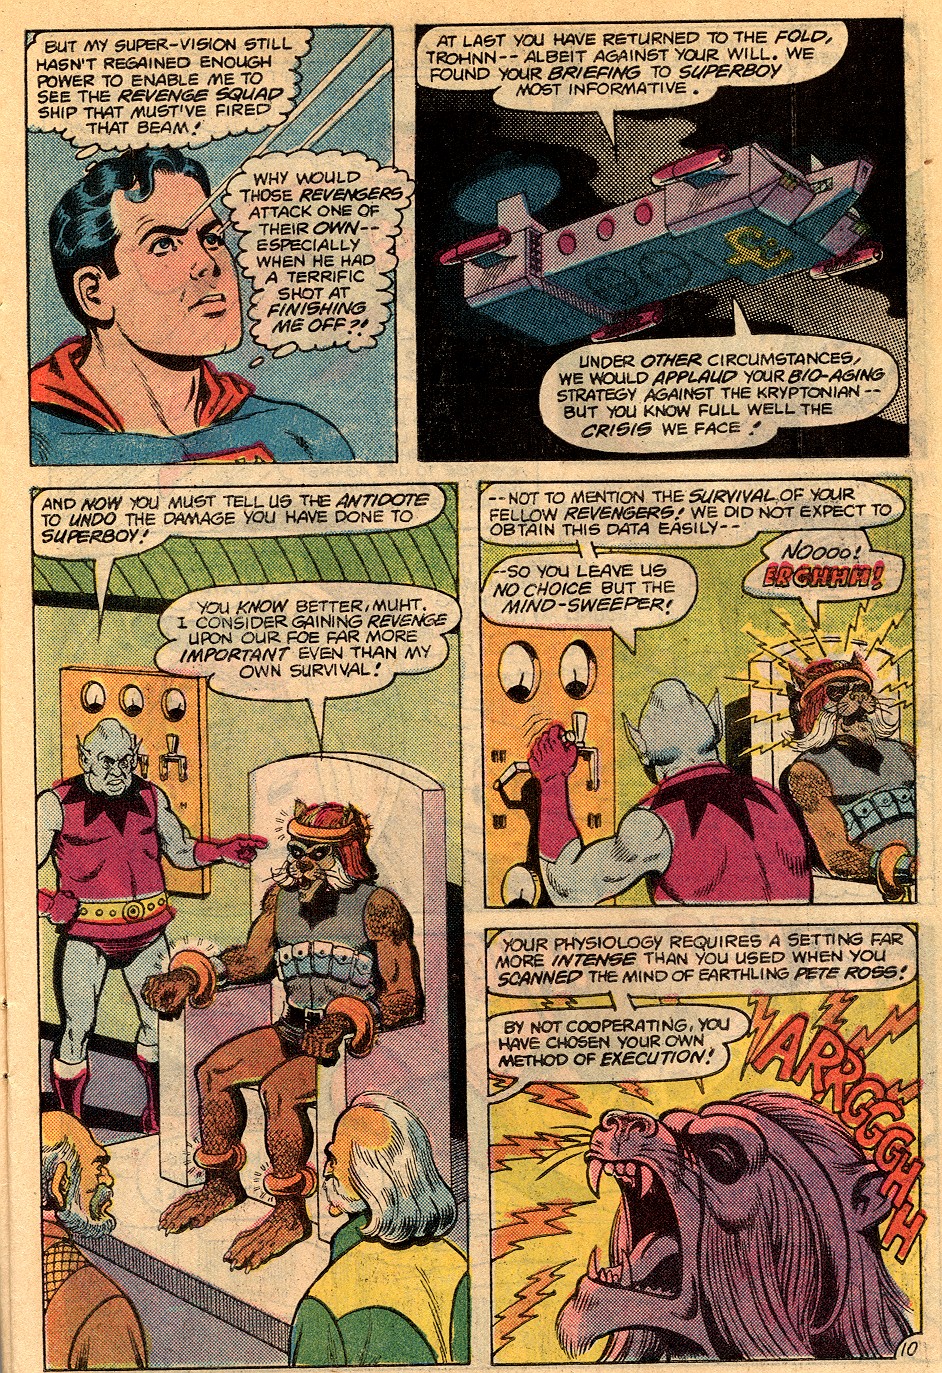 The New Adventures of Superboy 33 Page 14